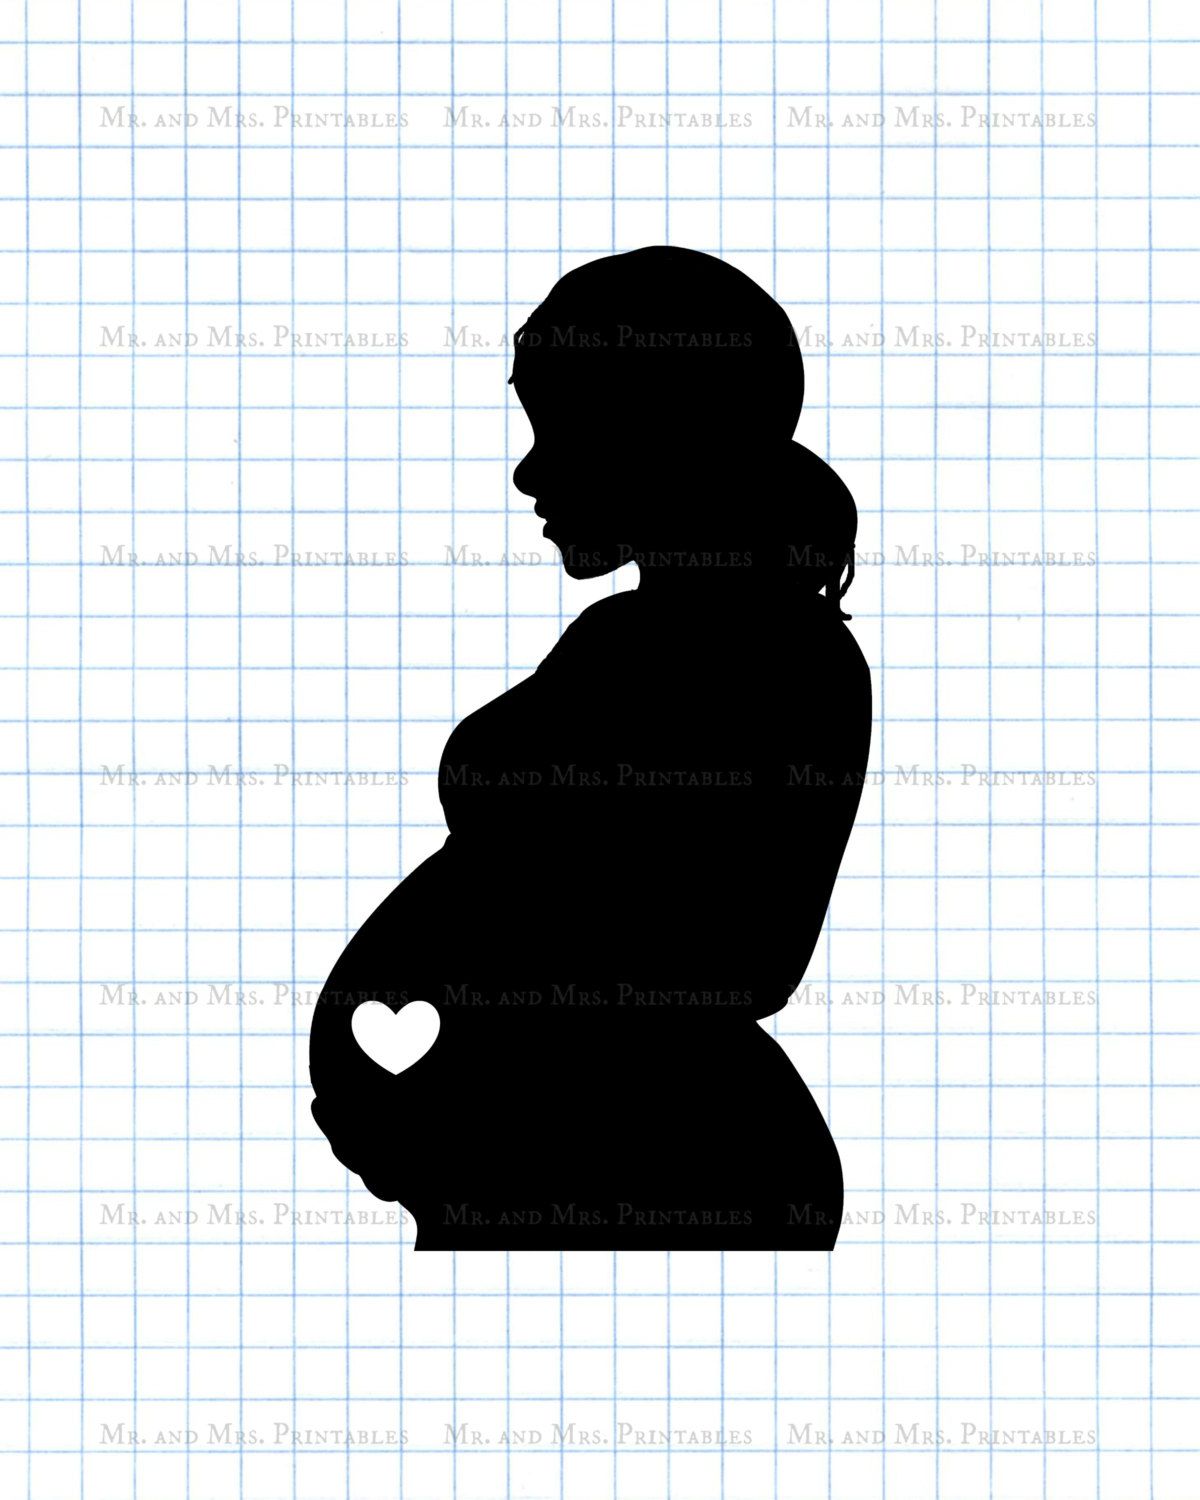 Pin on scrapbooking life. Pregnancy clipart black and white